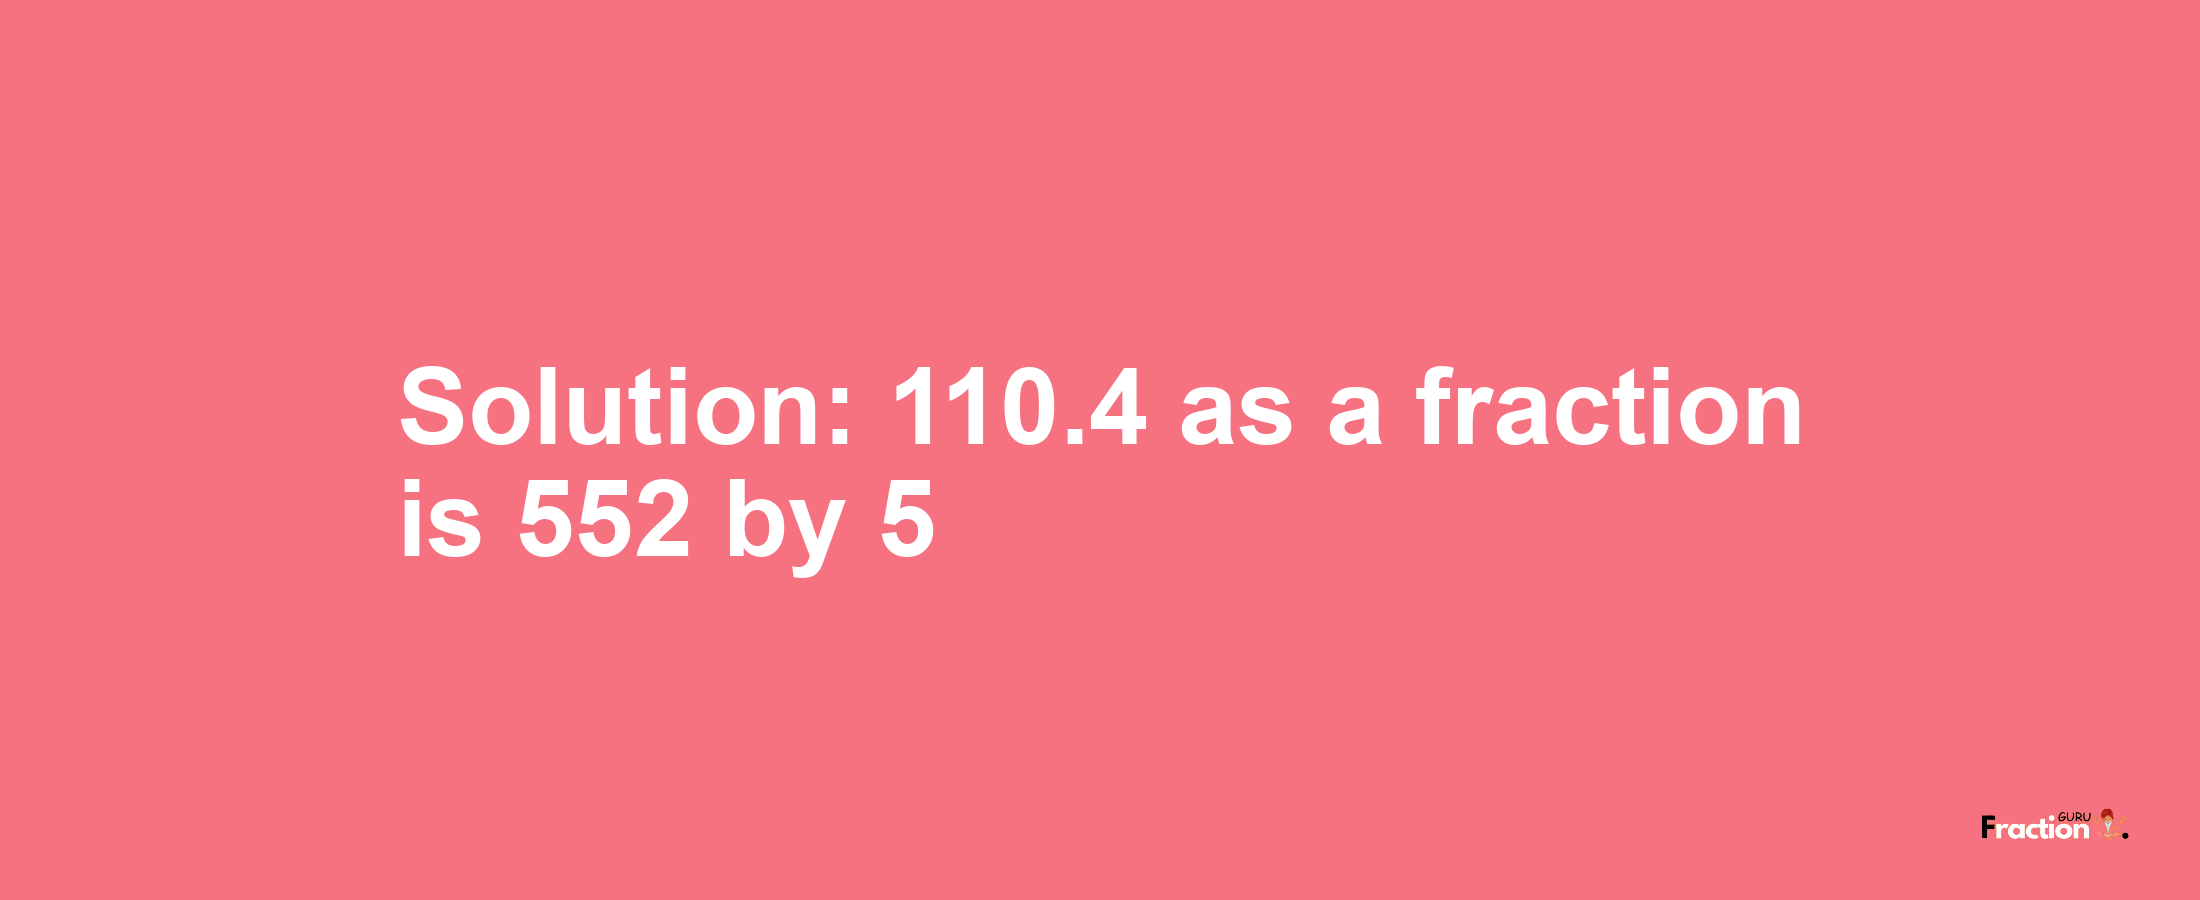 Solution:110.4 as a fraction is 552/5